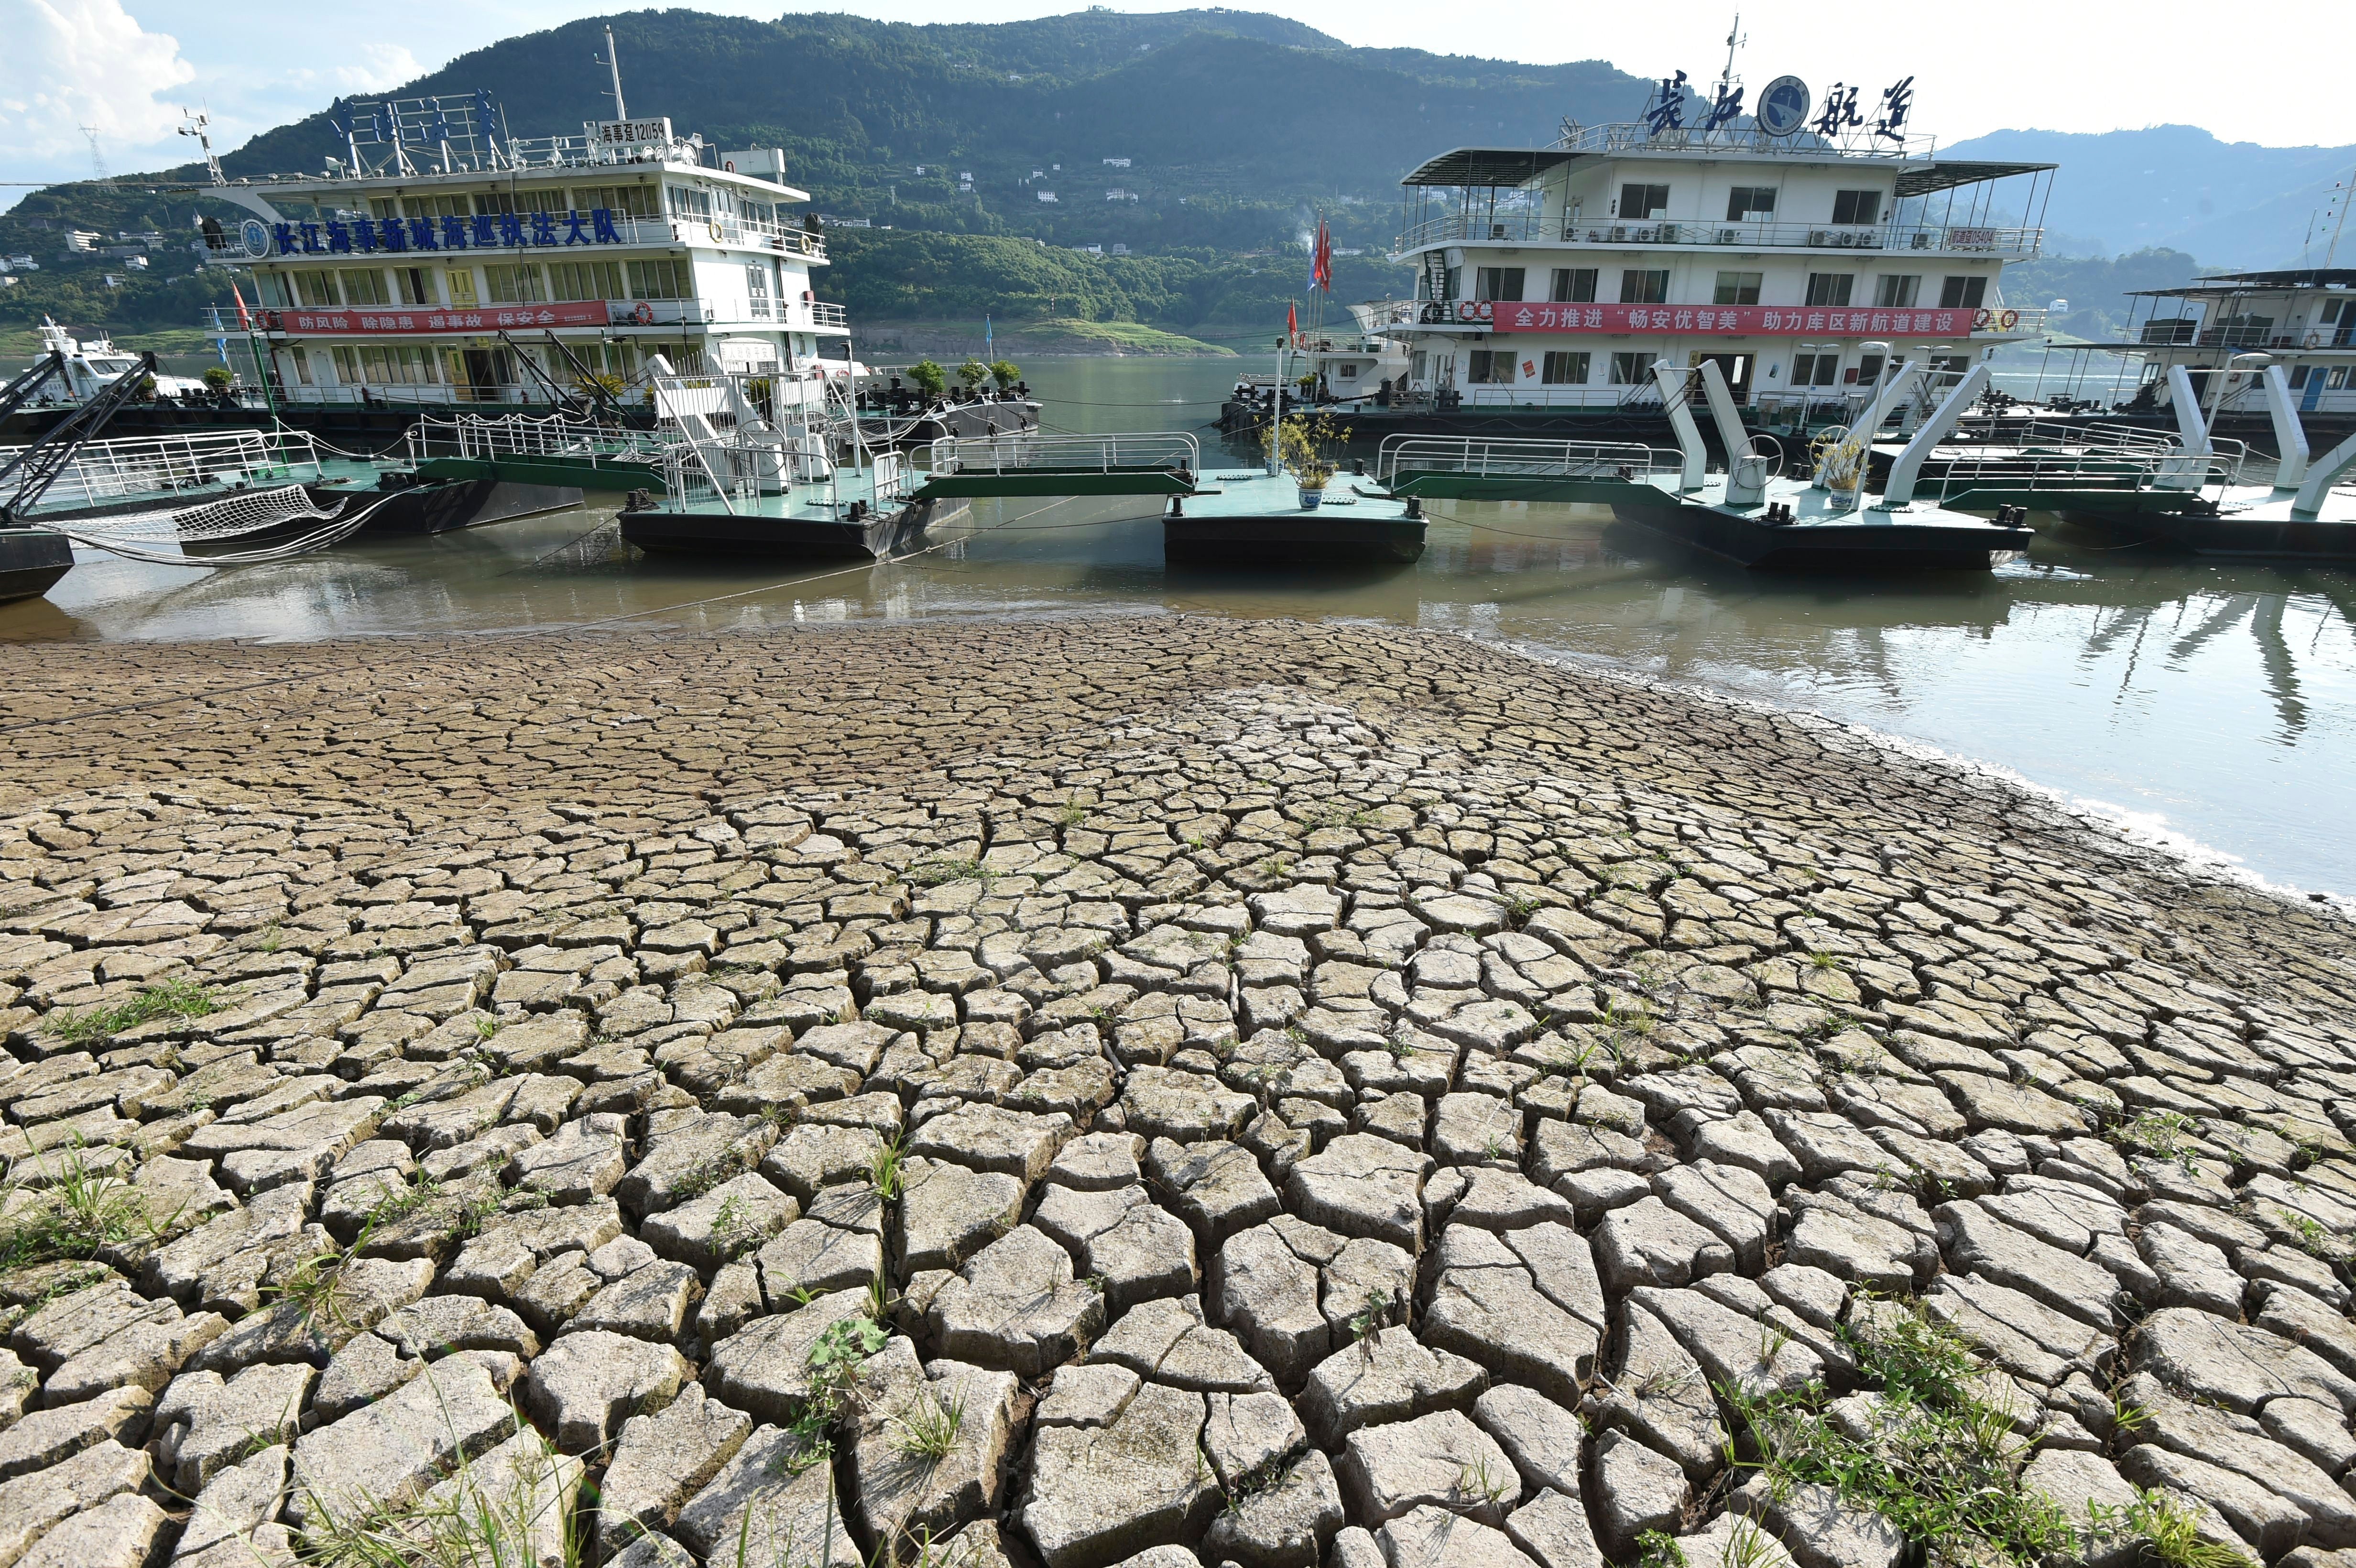 Boats on the dried-out riverbed on the Yangtze near Chongqing on August 16. (Photo: Chinatopix, AP)